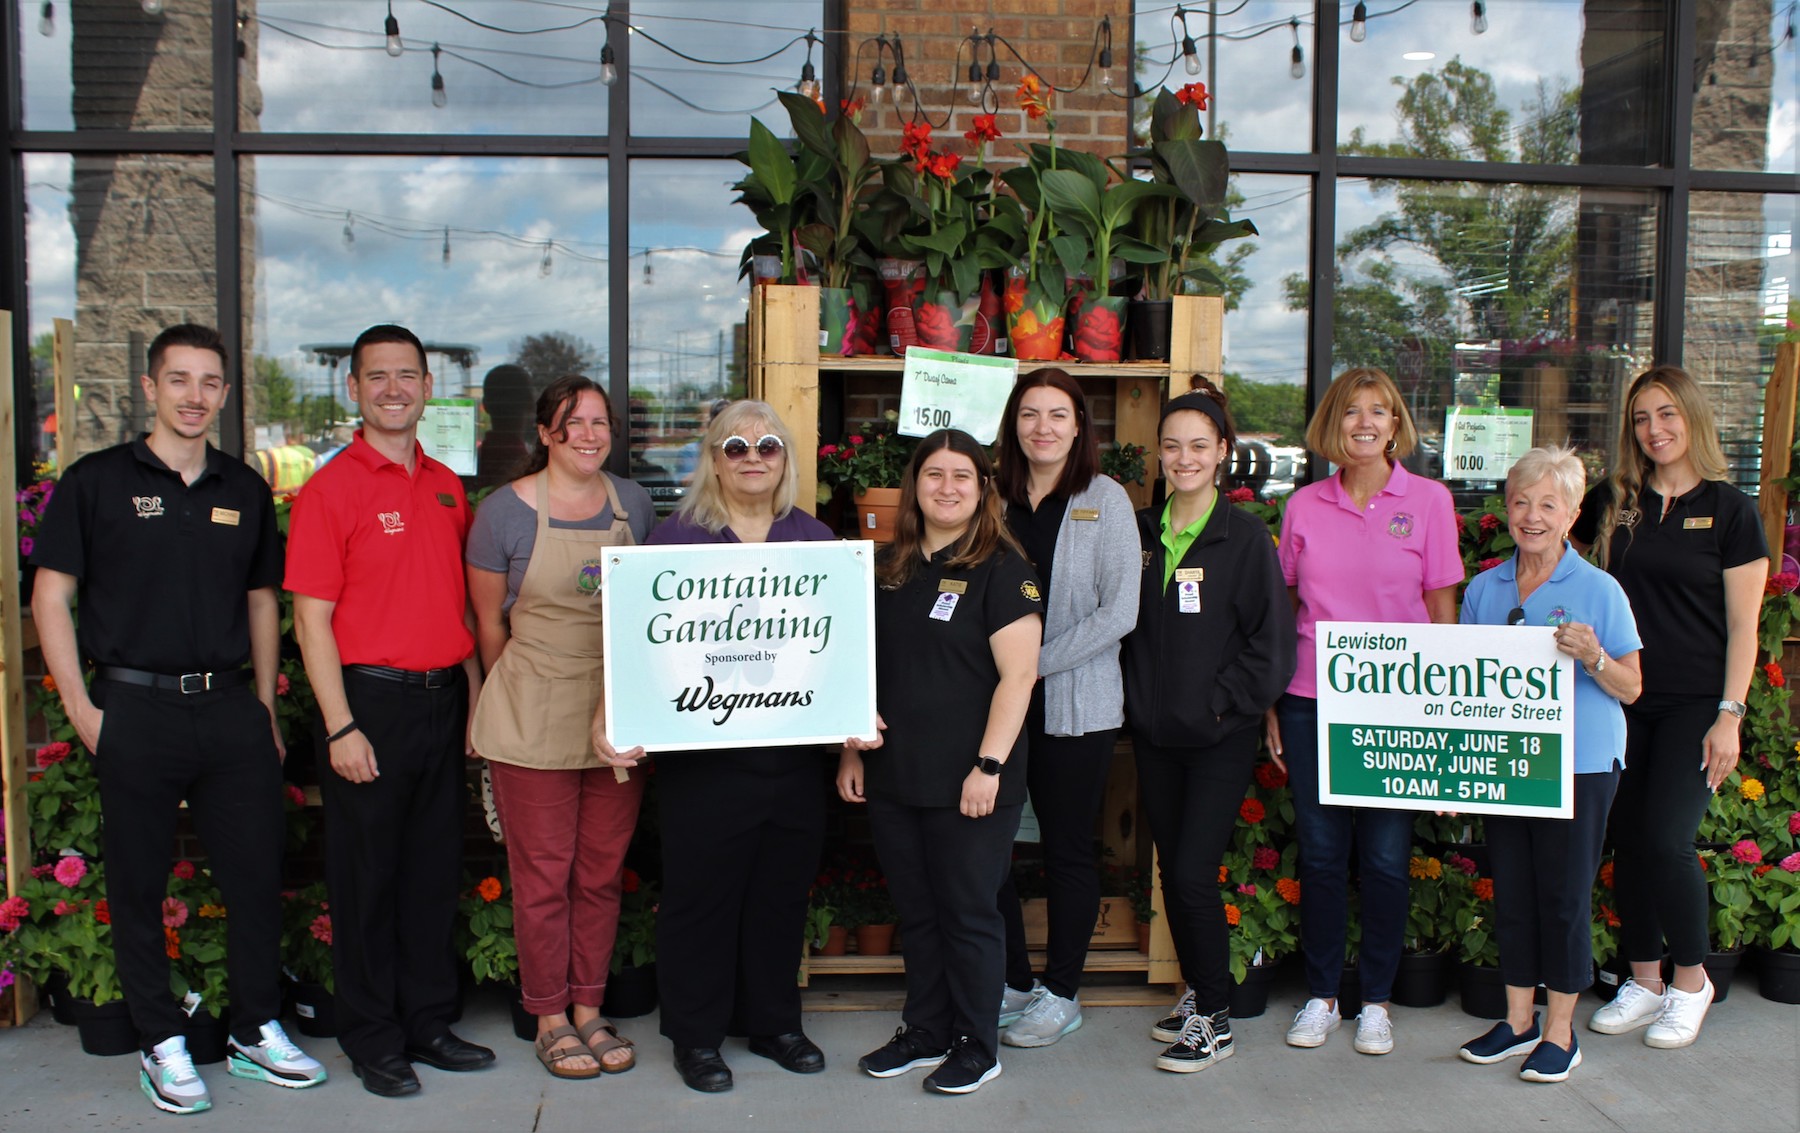 Wegmans is the sponsor of the container garden contest, which will be held in Hennepin Park. From left: Michael, Kevin, Nicole Johnson, Kay Kalick, Katie, Tiffany, Shanya, Judy Talarico, Barbara Carter and Toni. (Photo by Robert Albee)